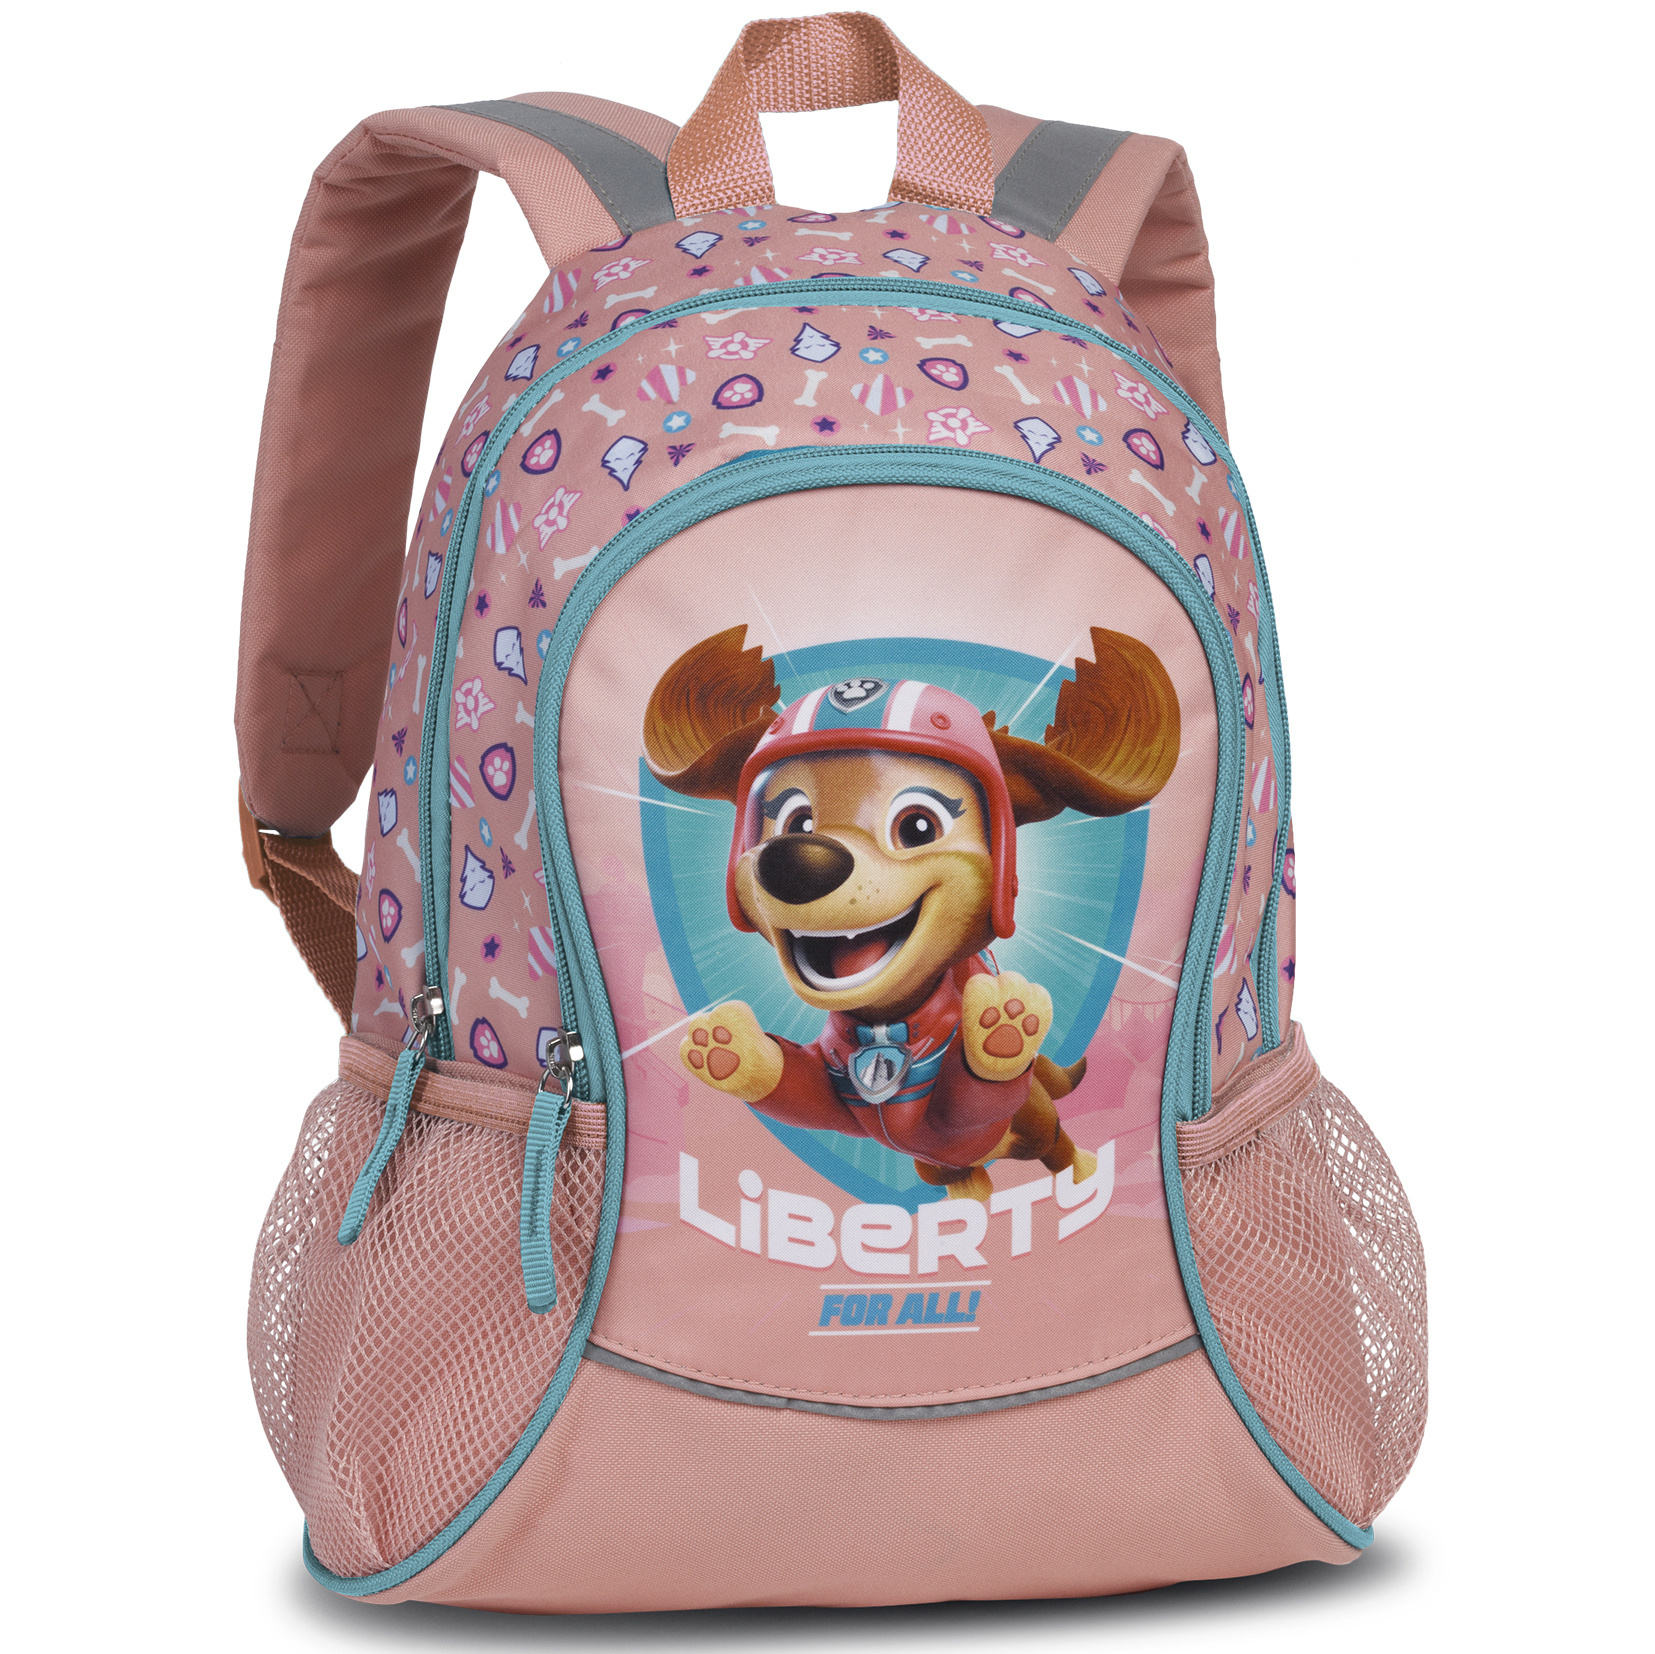 Paw Patrol Backpack Everest - 35 x 27 x 15 cm - Polyester